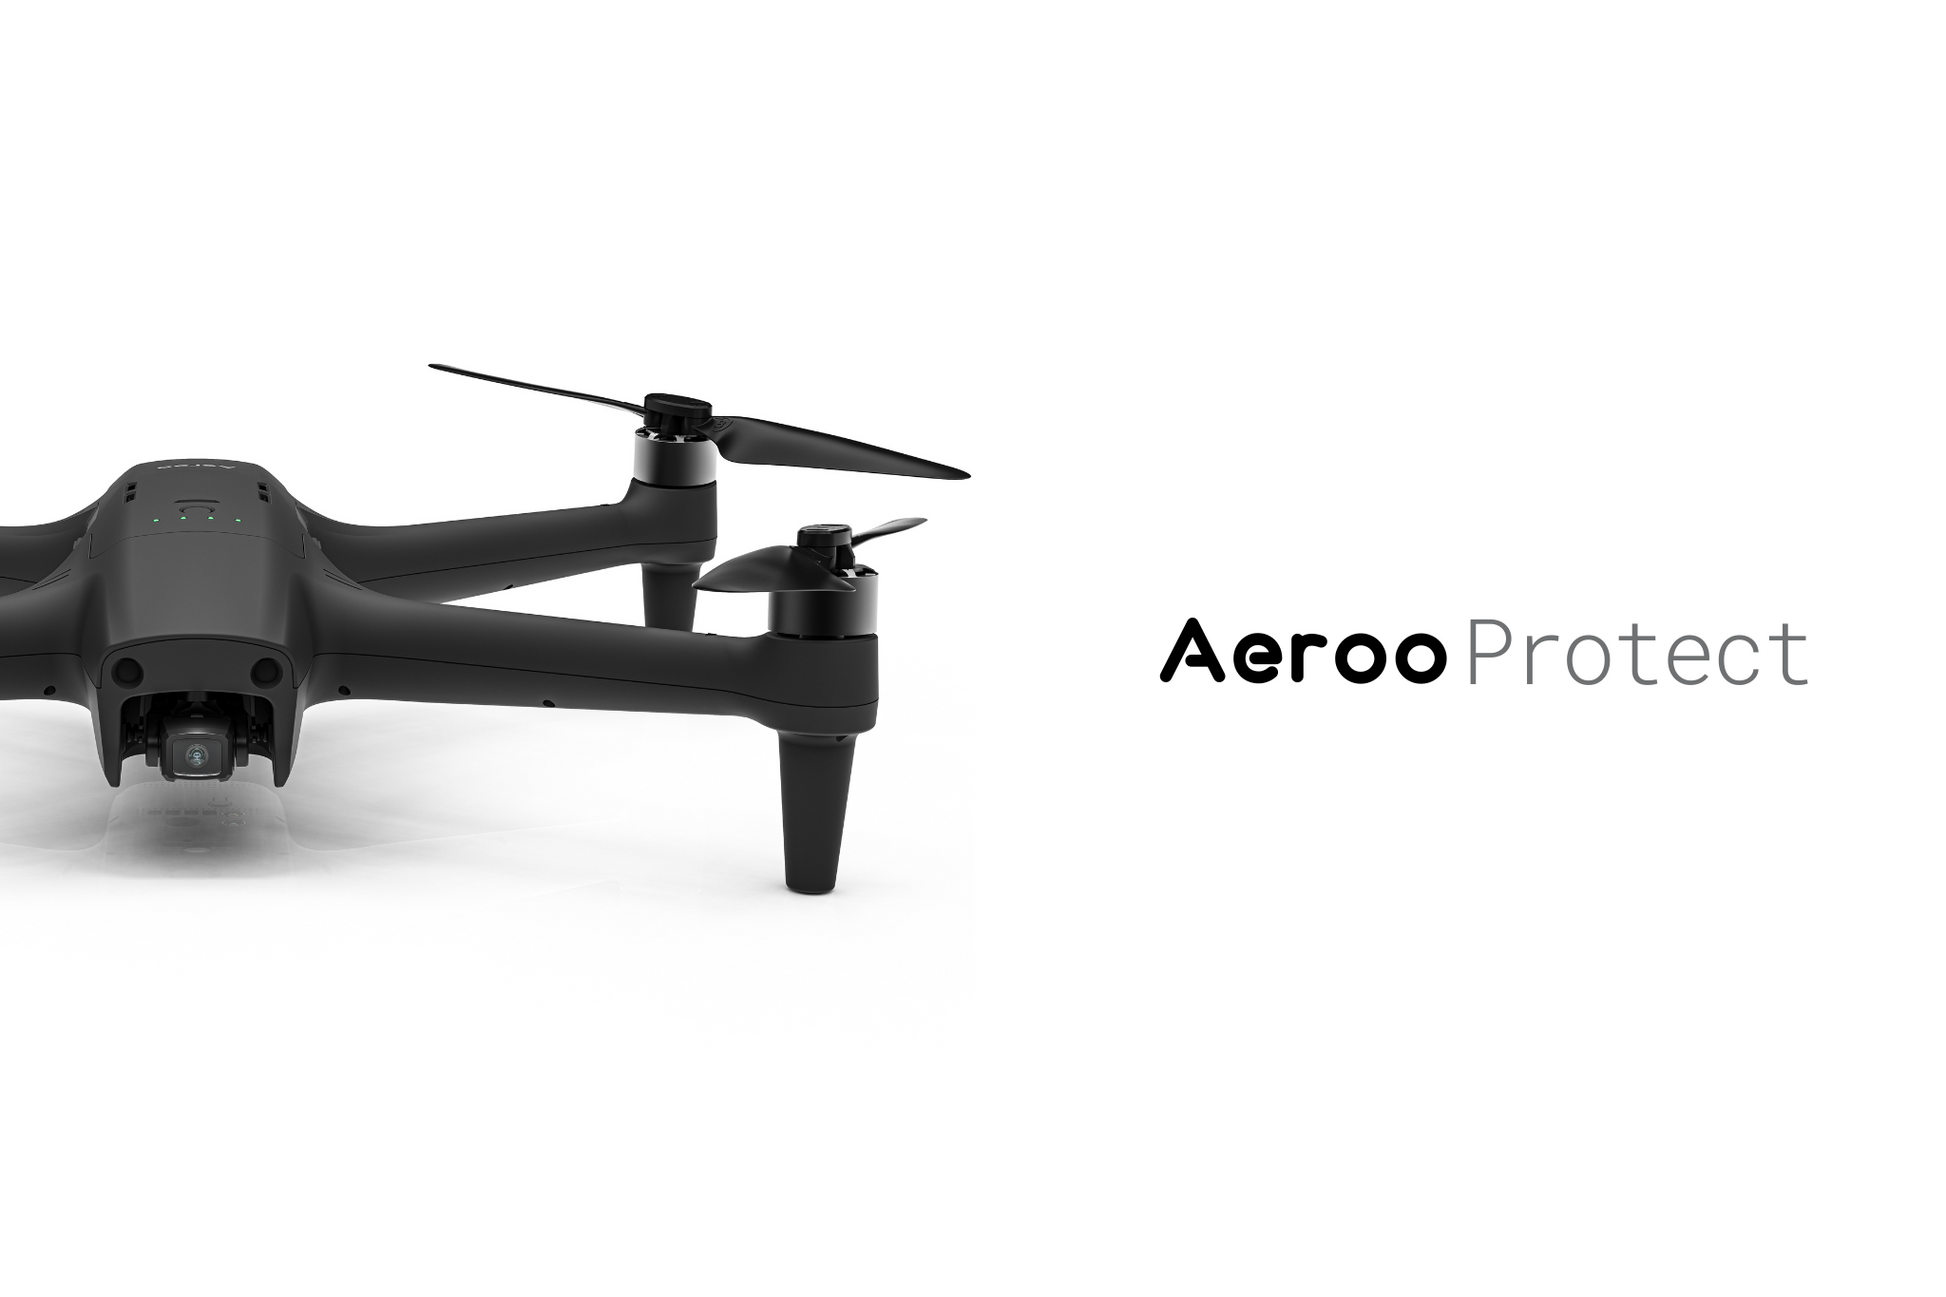 Aeroo Pro drone from front with the text "Aeroo Protect" on its right